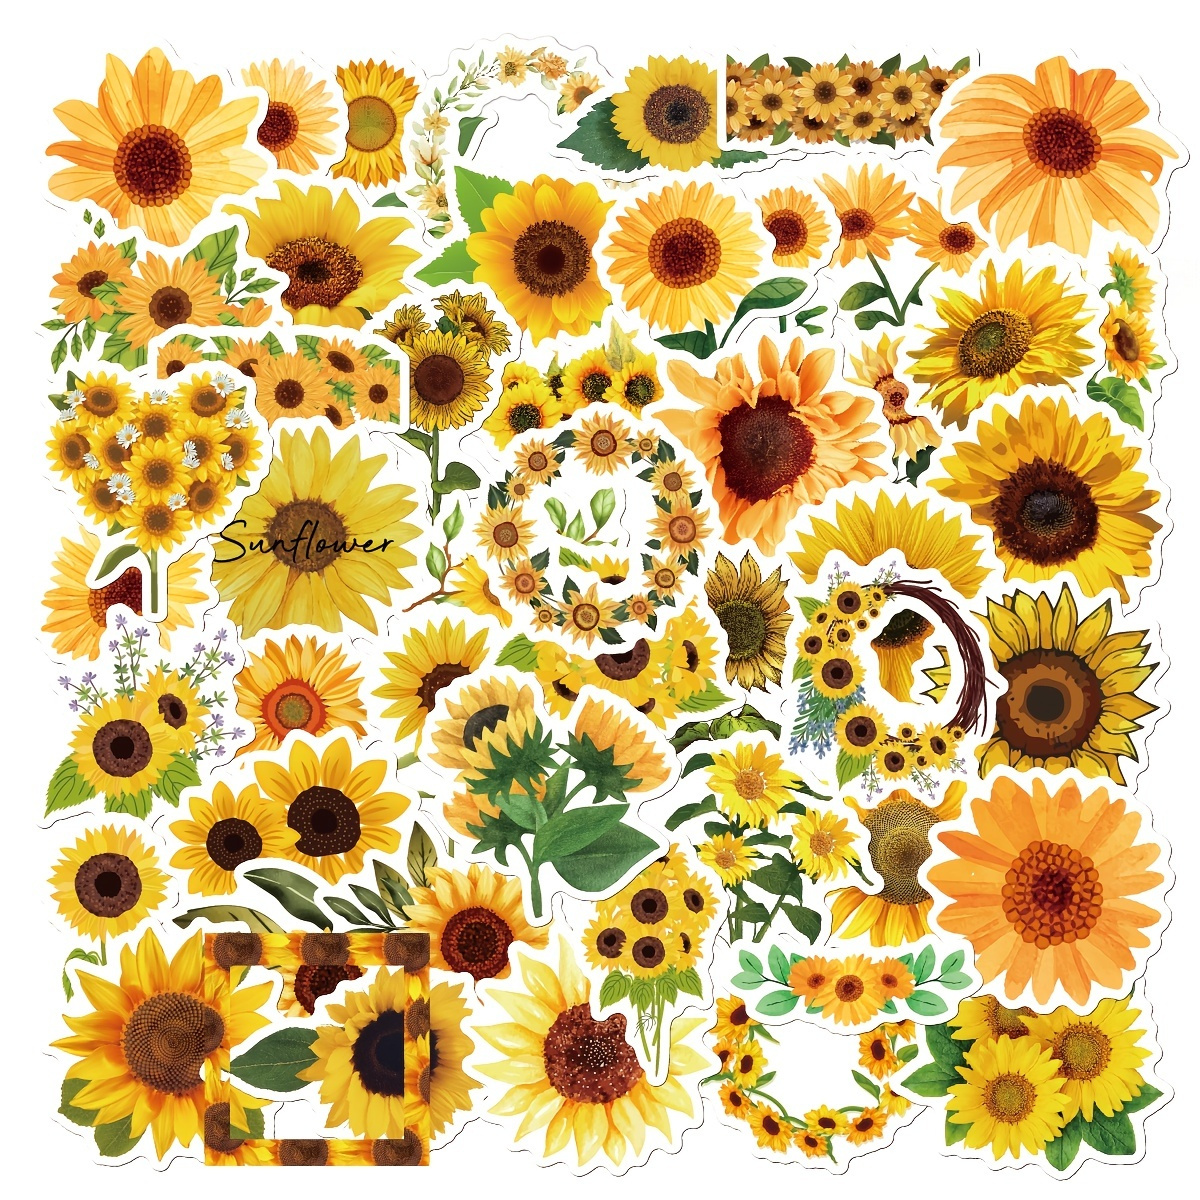 TINYSOME Resin Stickers Waterproof Sunflower Flowers Stickers Decals for  Water Bottle Laptop Skateboard Computer Phone 